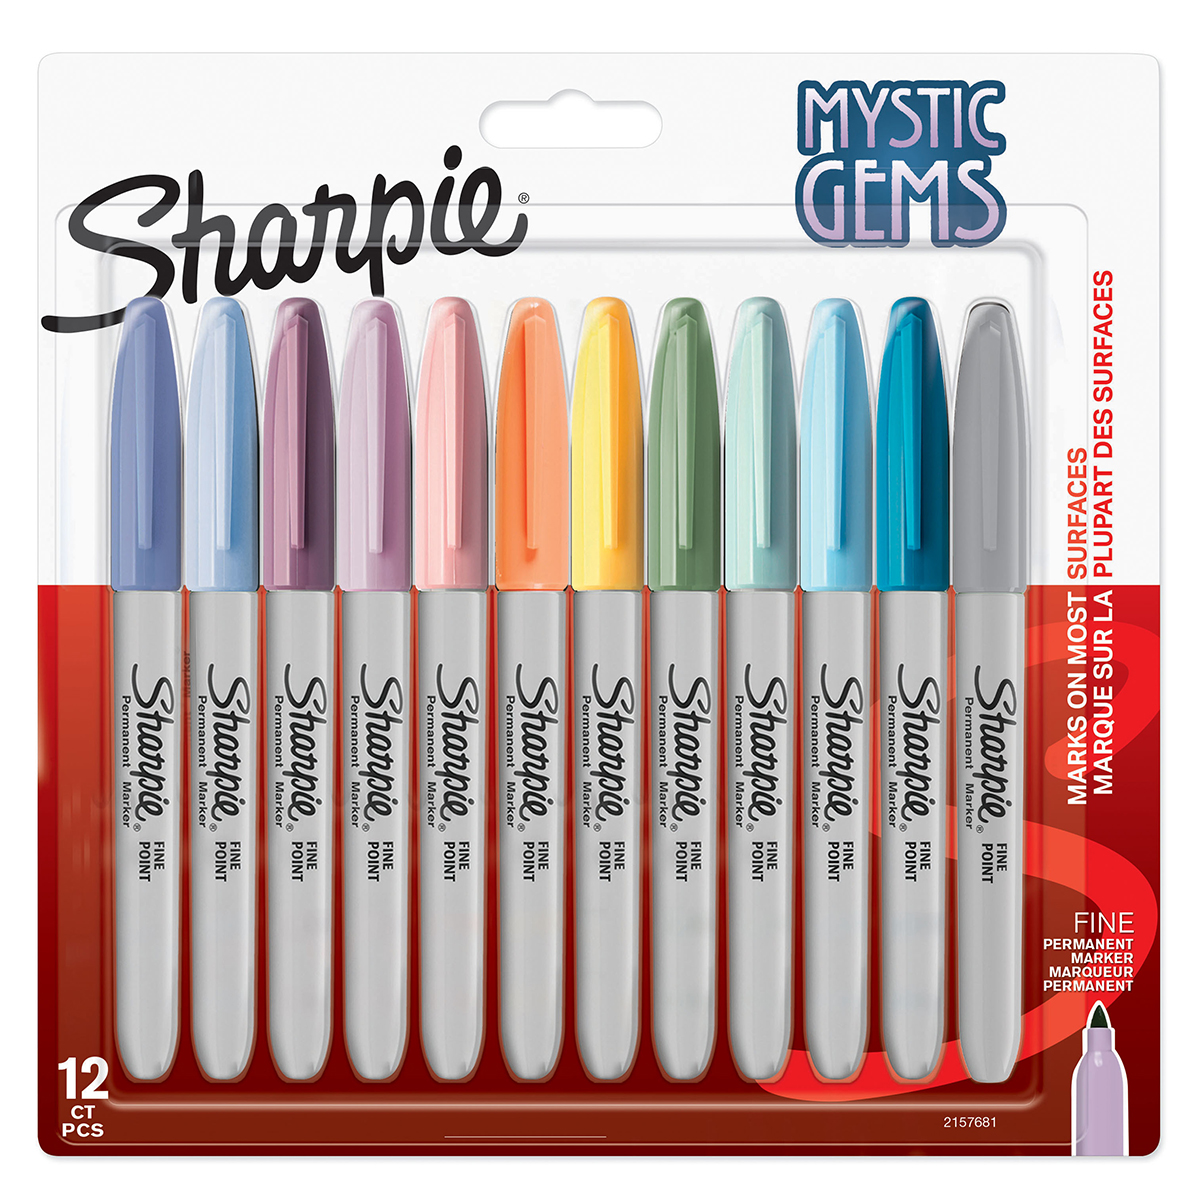 Save on Sharpie Permanent Marker Fine Point Metallic Silver - 2 ct Order  Online Delivery